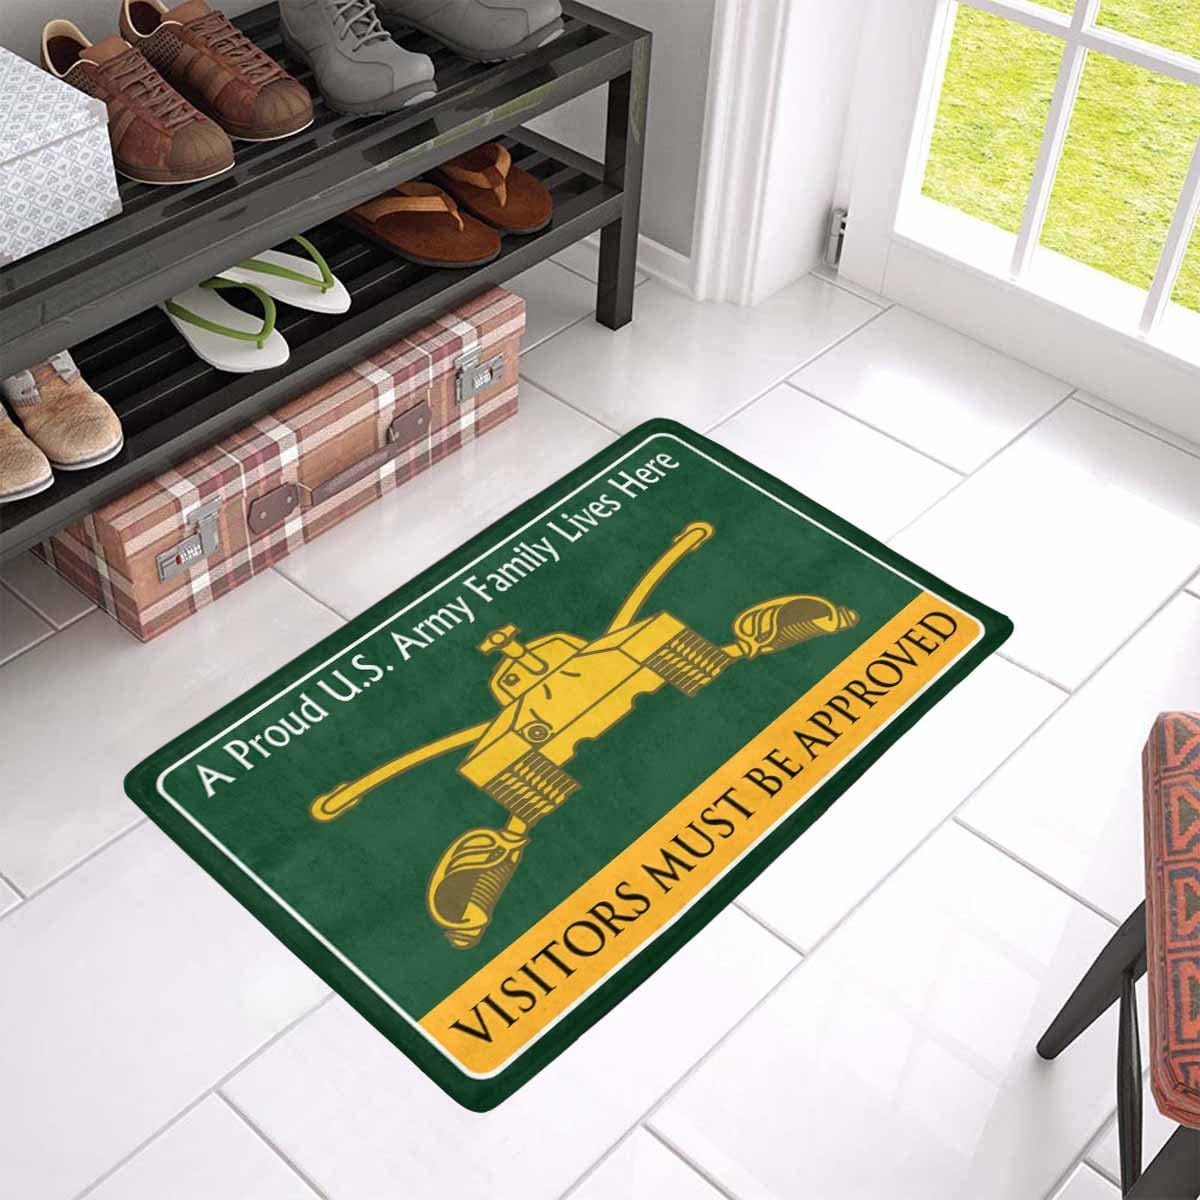 U.S Army Armor Branch Family Doormat - Visitors must be approved (23.6 inches x 15.7 inches)-Doormat-Army-Branch-Veterans Nation